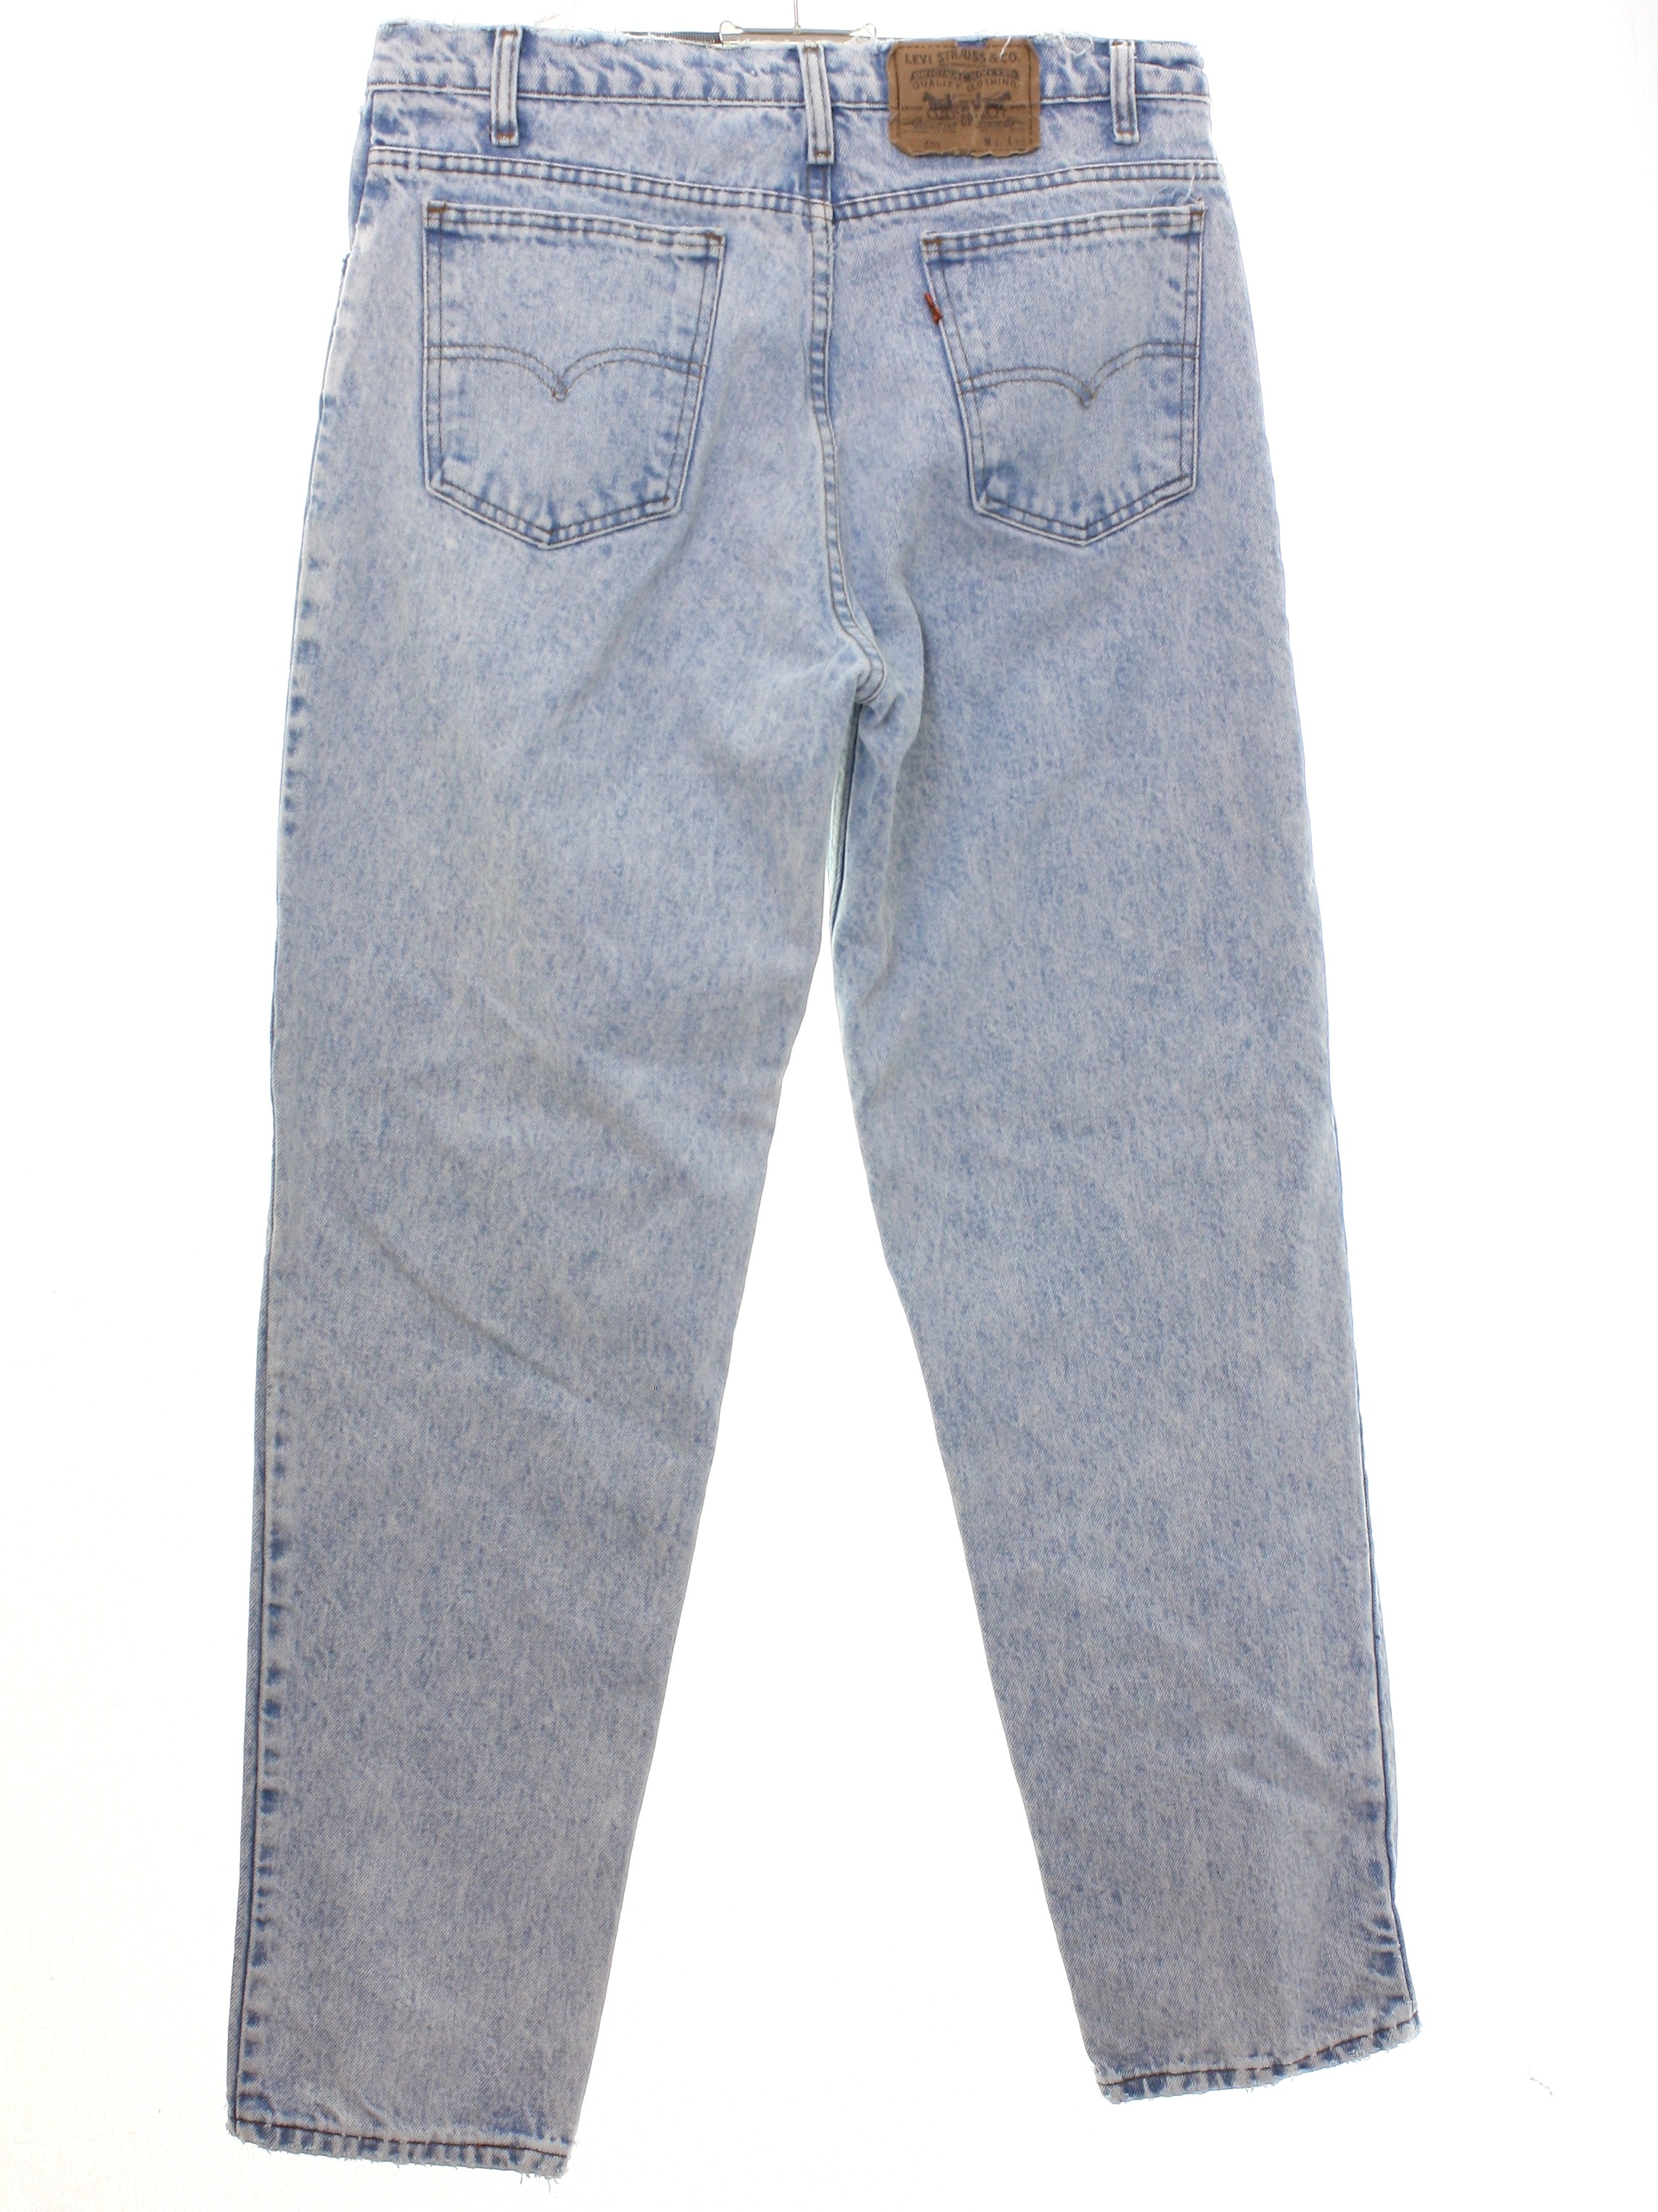 1980's Pants (Levis 550): 80s -Levis 550- Mens slightly faded and worn ...